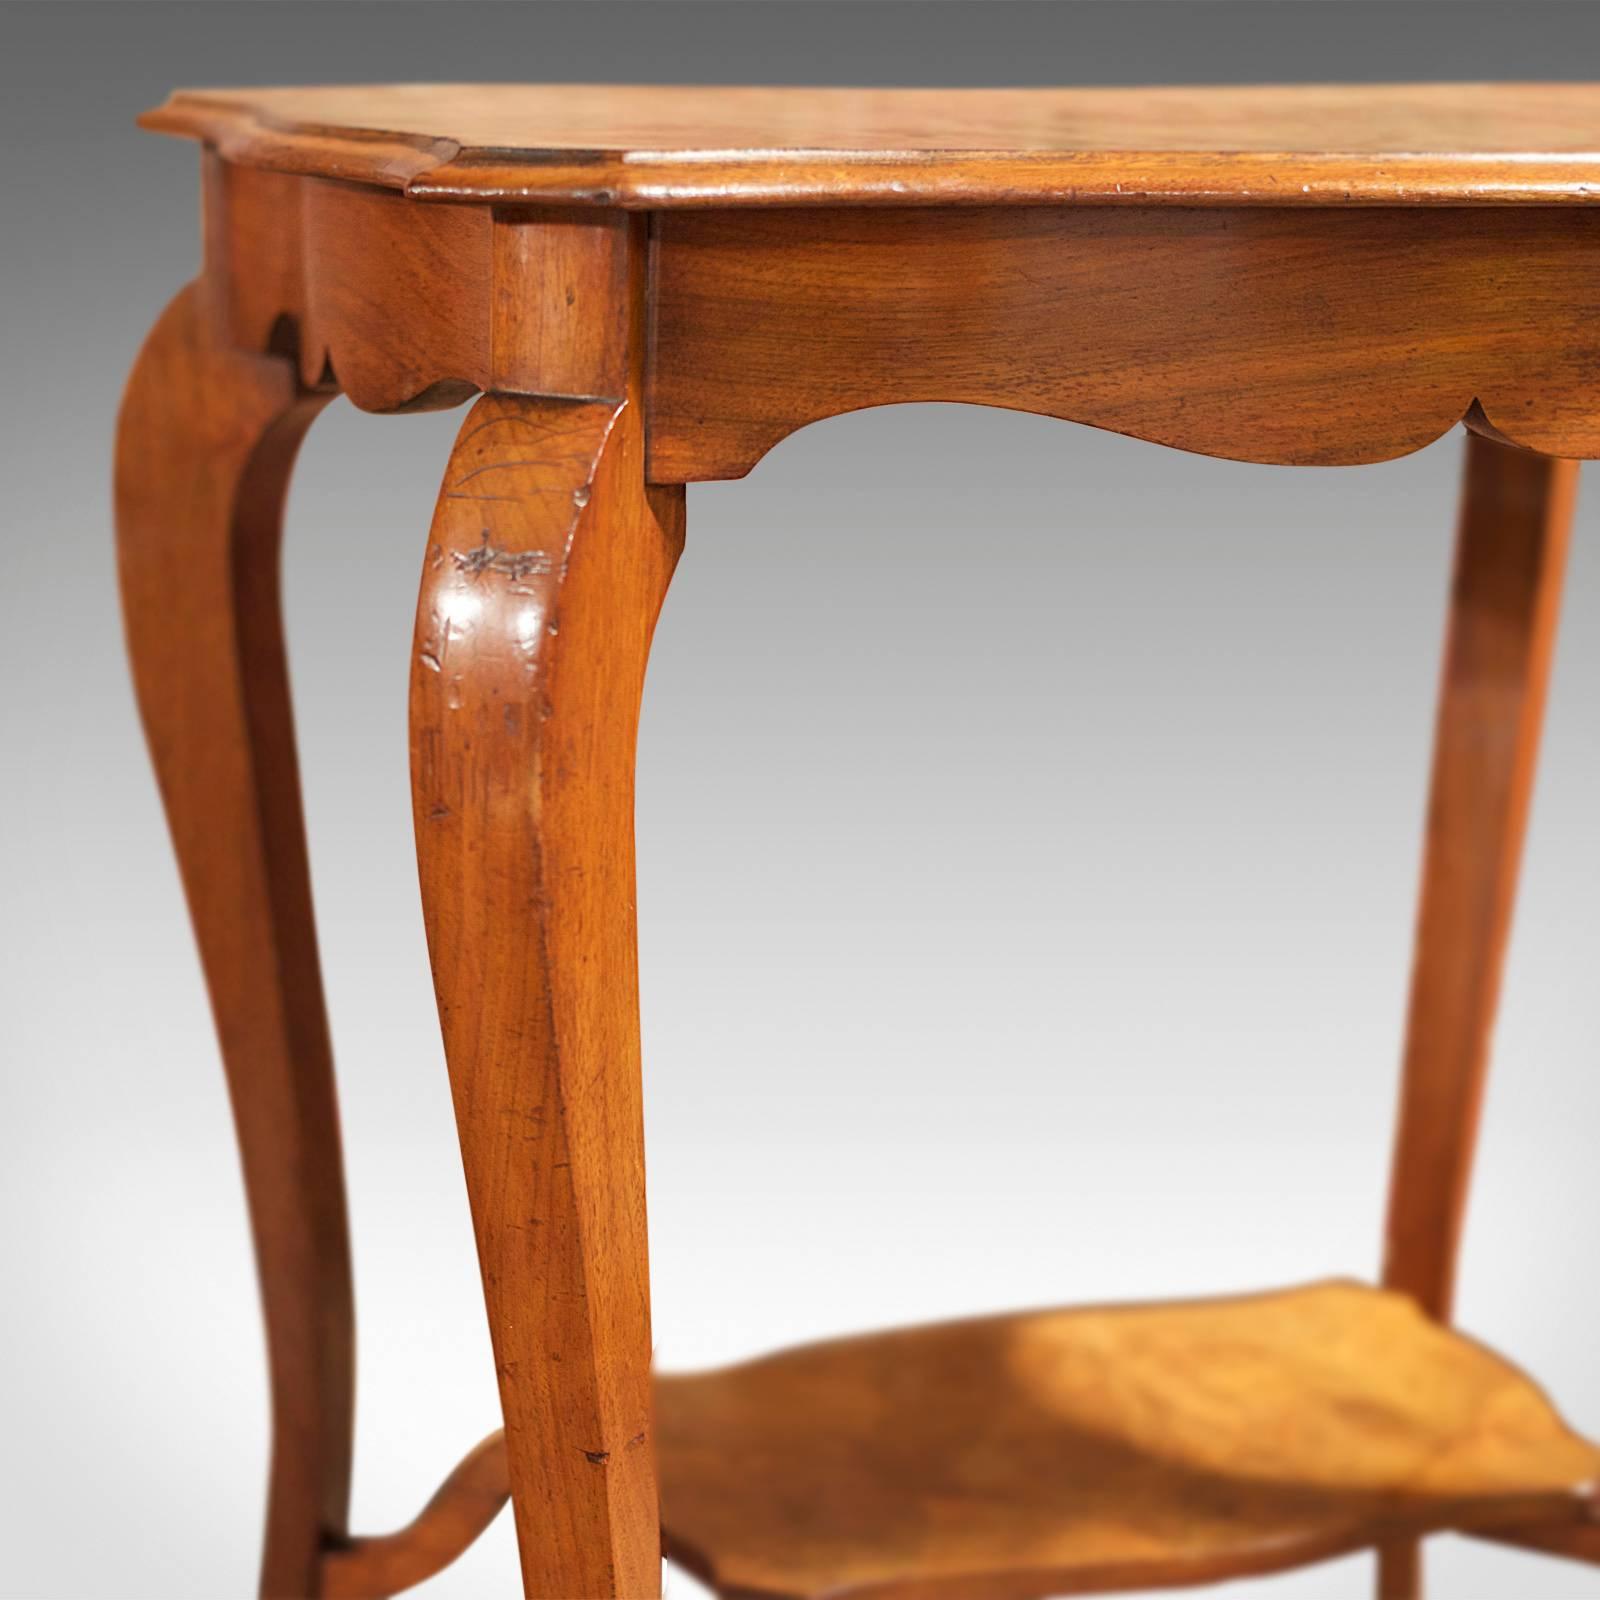 Great Britain (UK) Antique English Burr Walnut Two-Tier Side Table, circa 1900